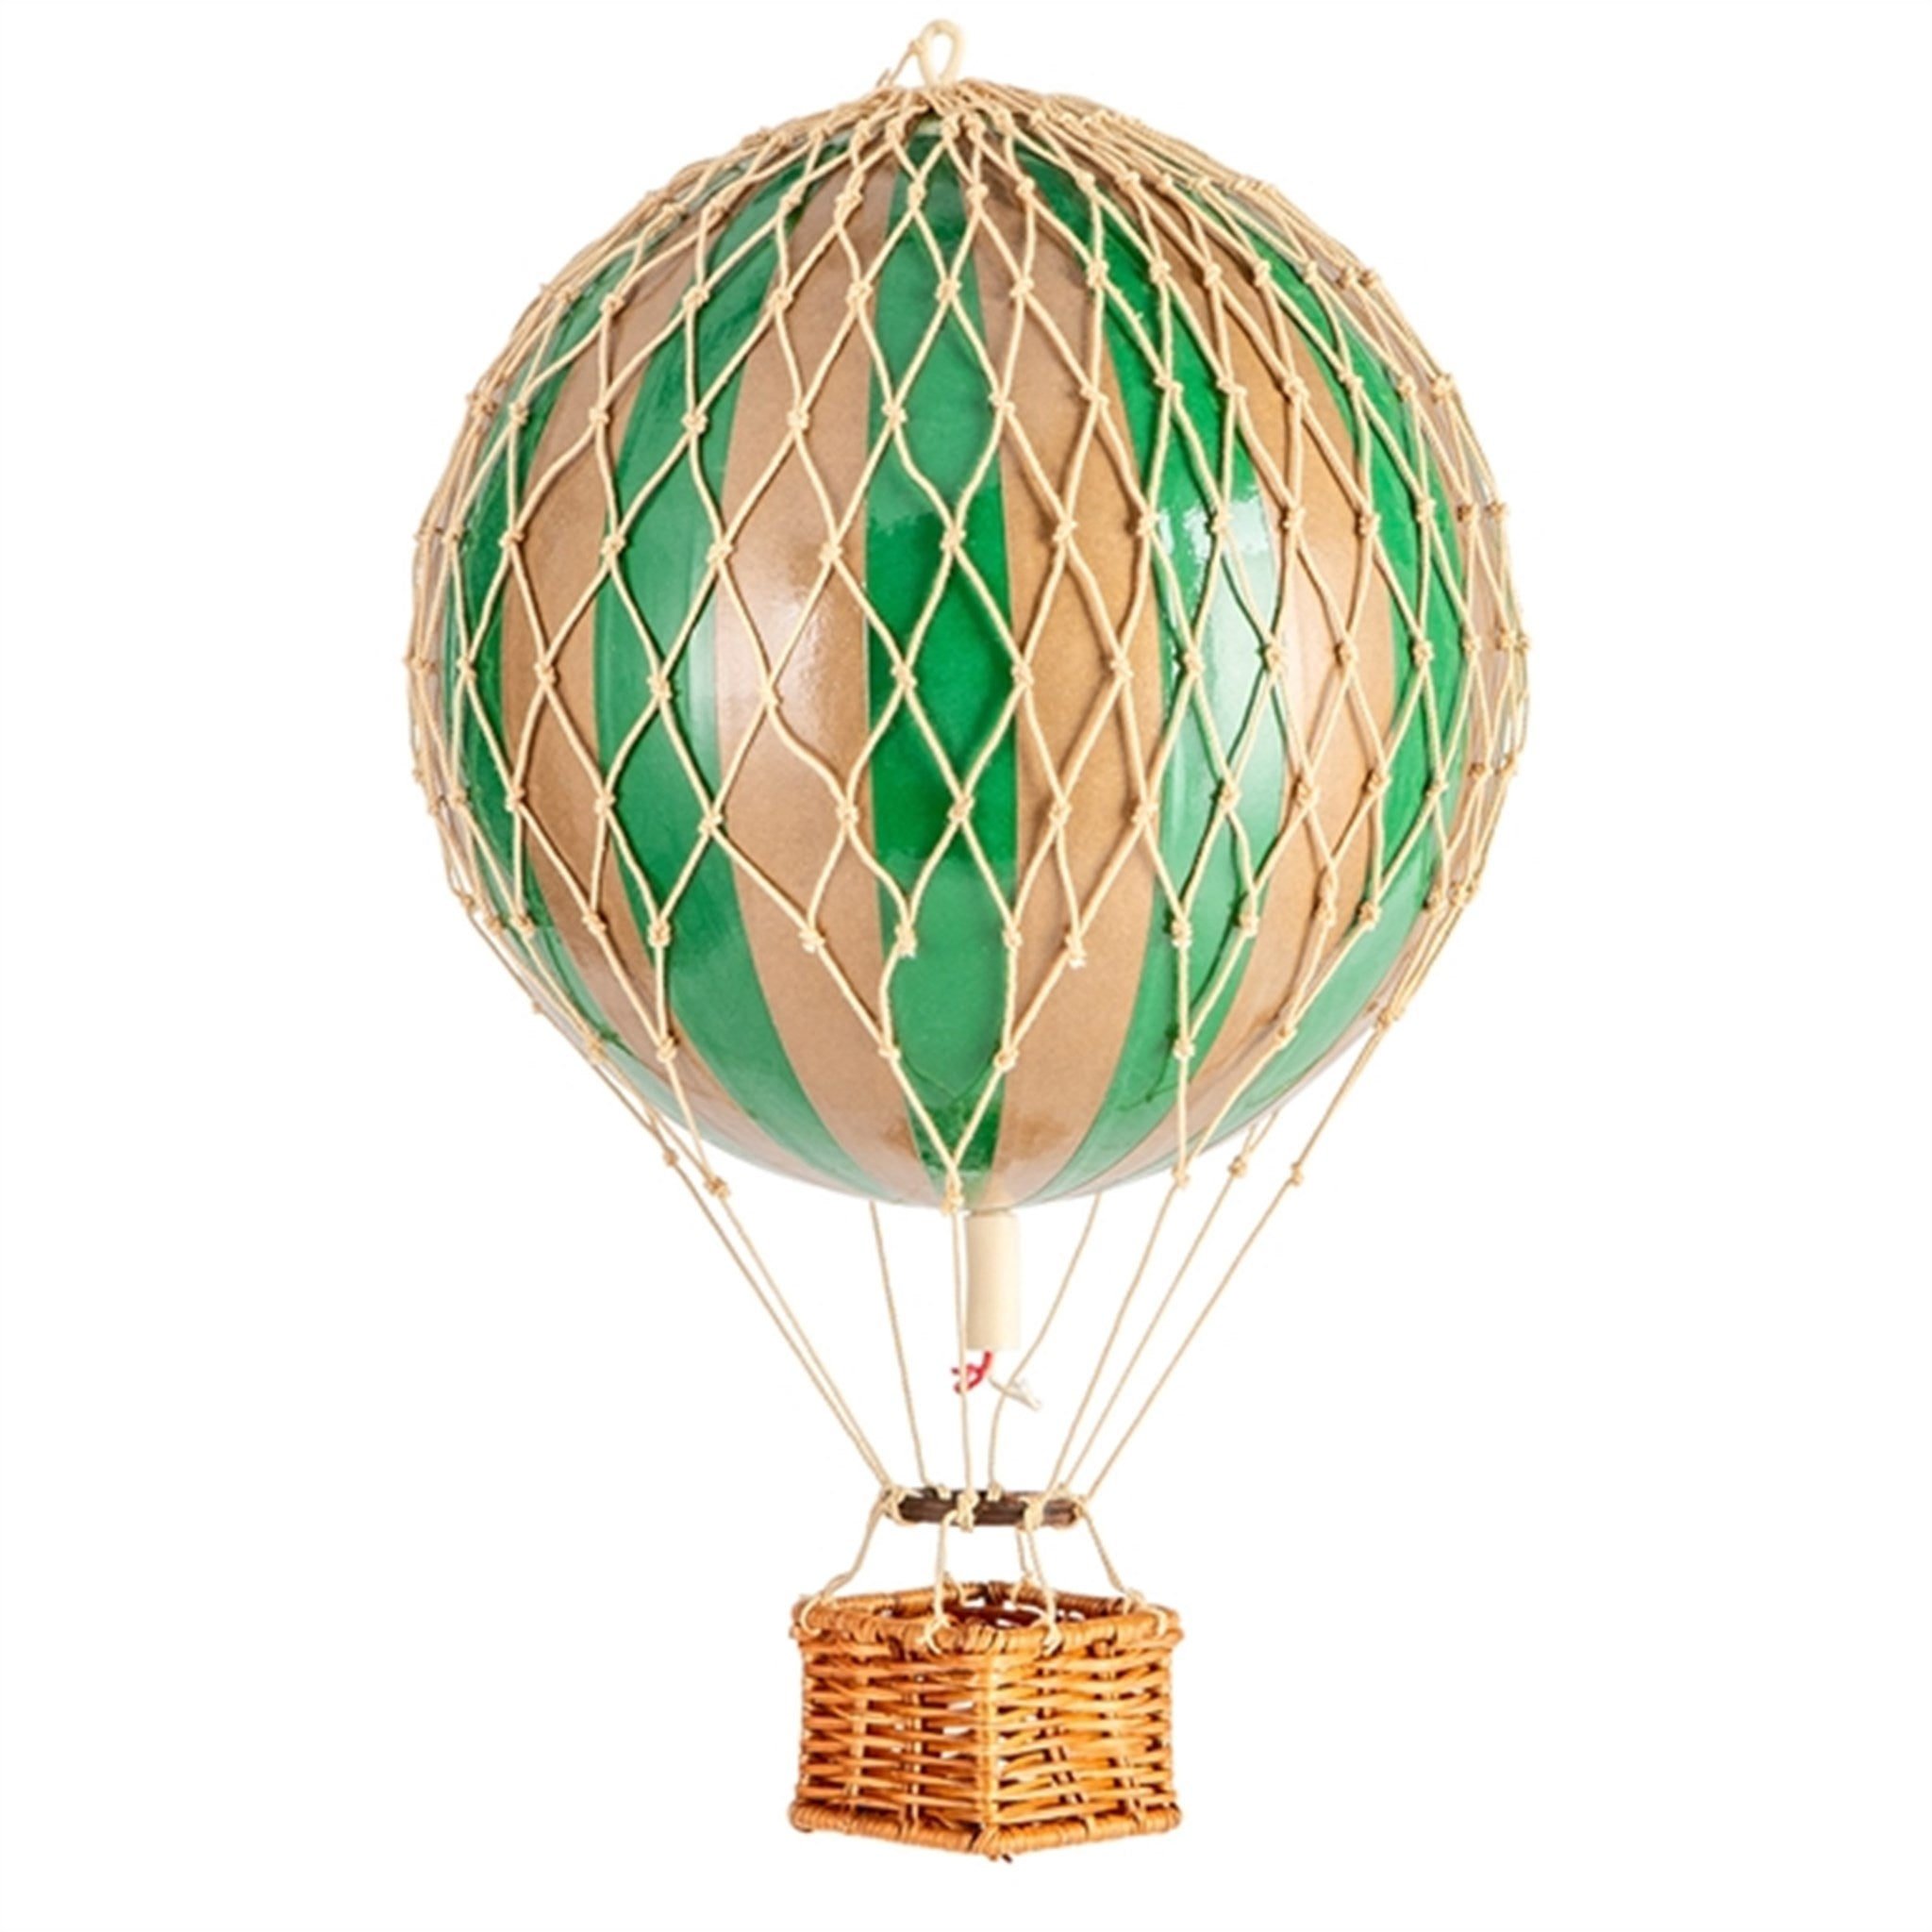 Authentic Models Balloon Gold Green 18 cm